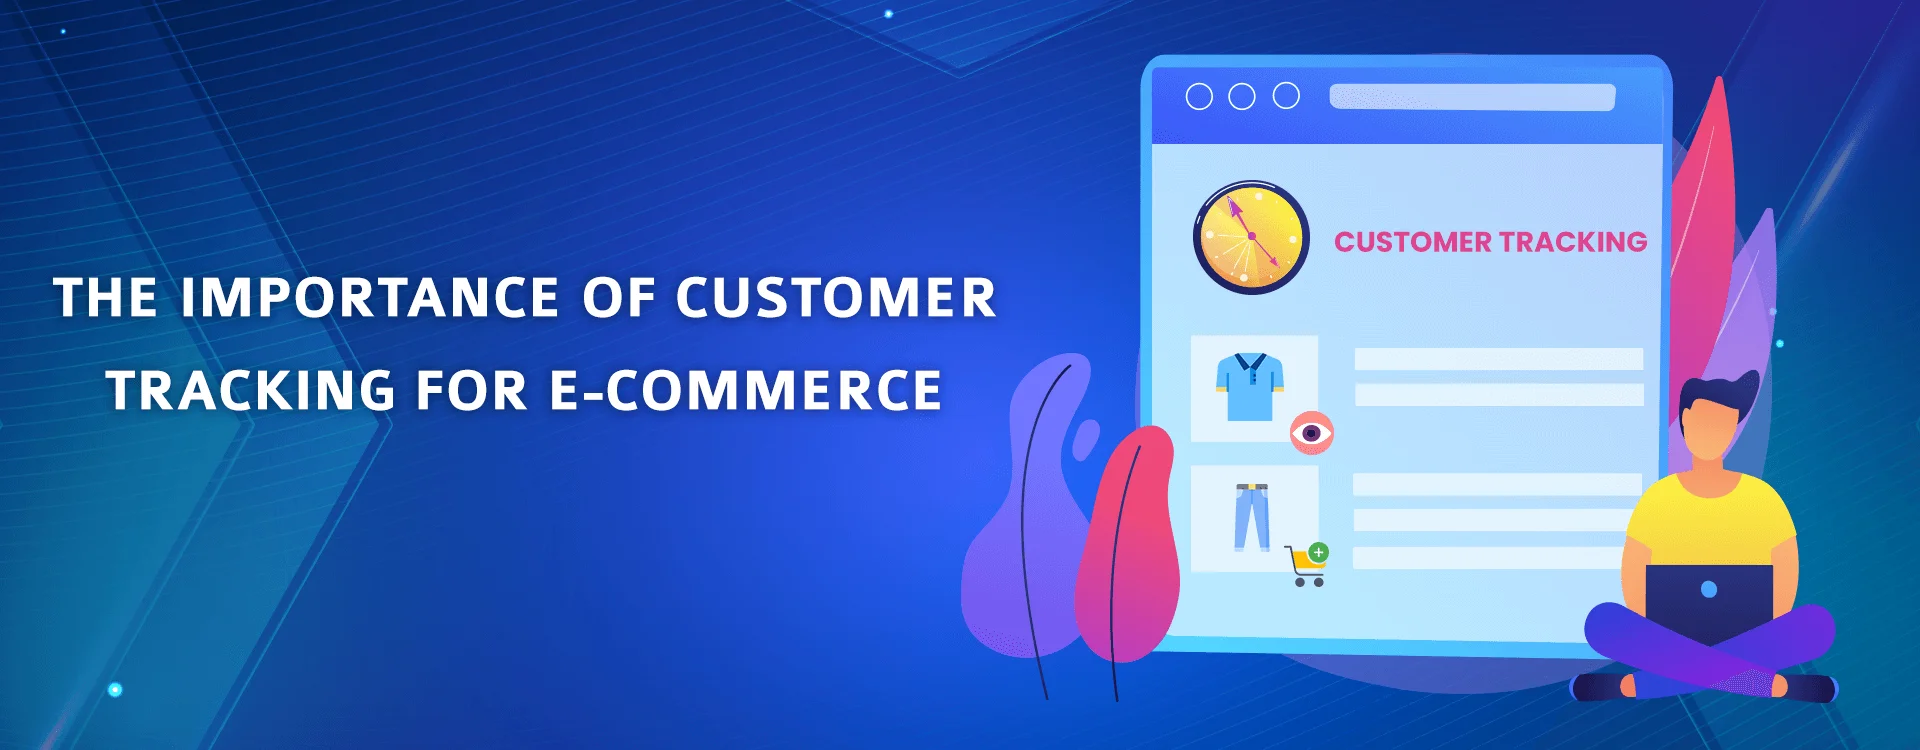 The importance of customer tracking for e-commerce